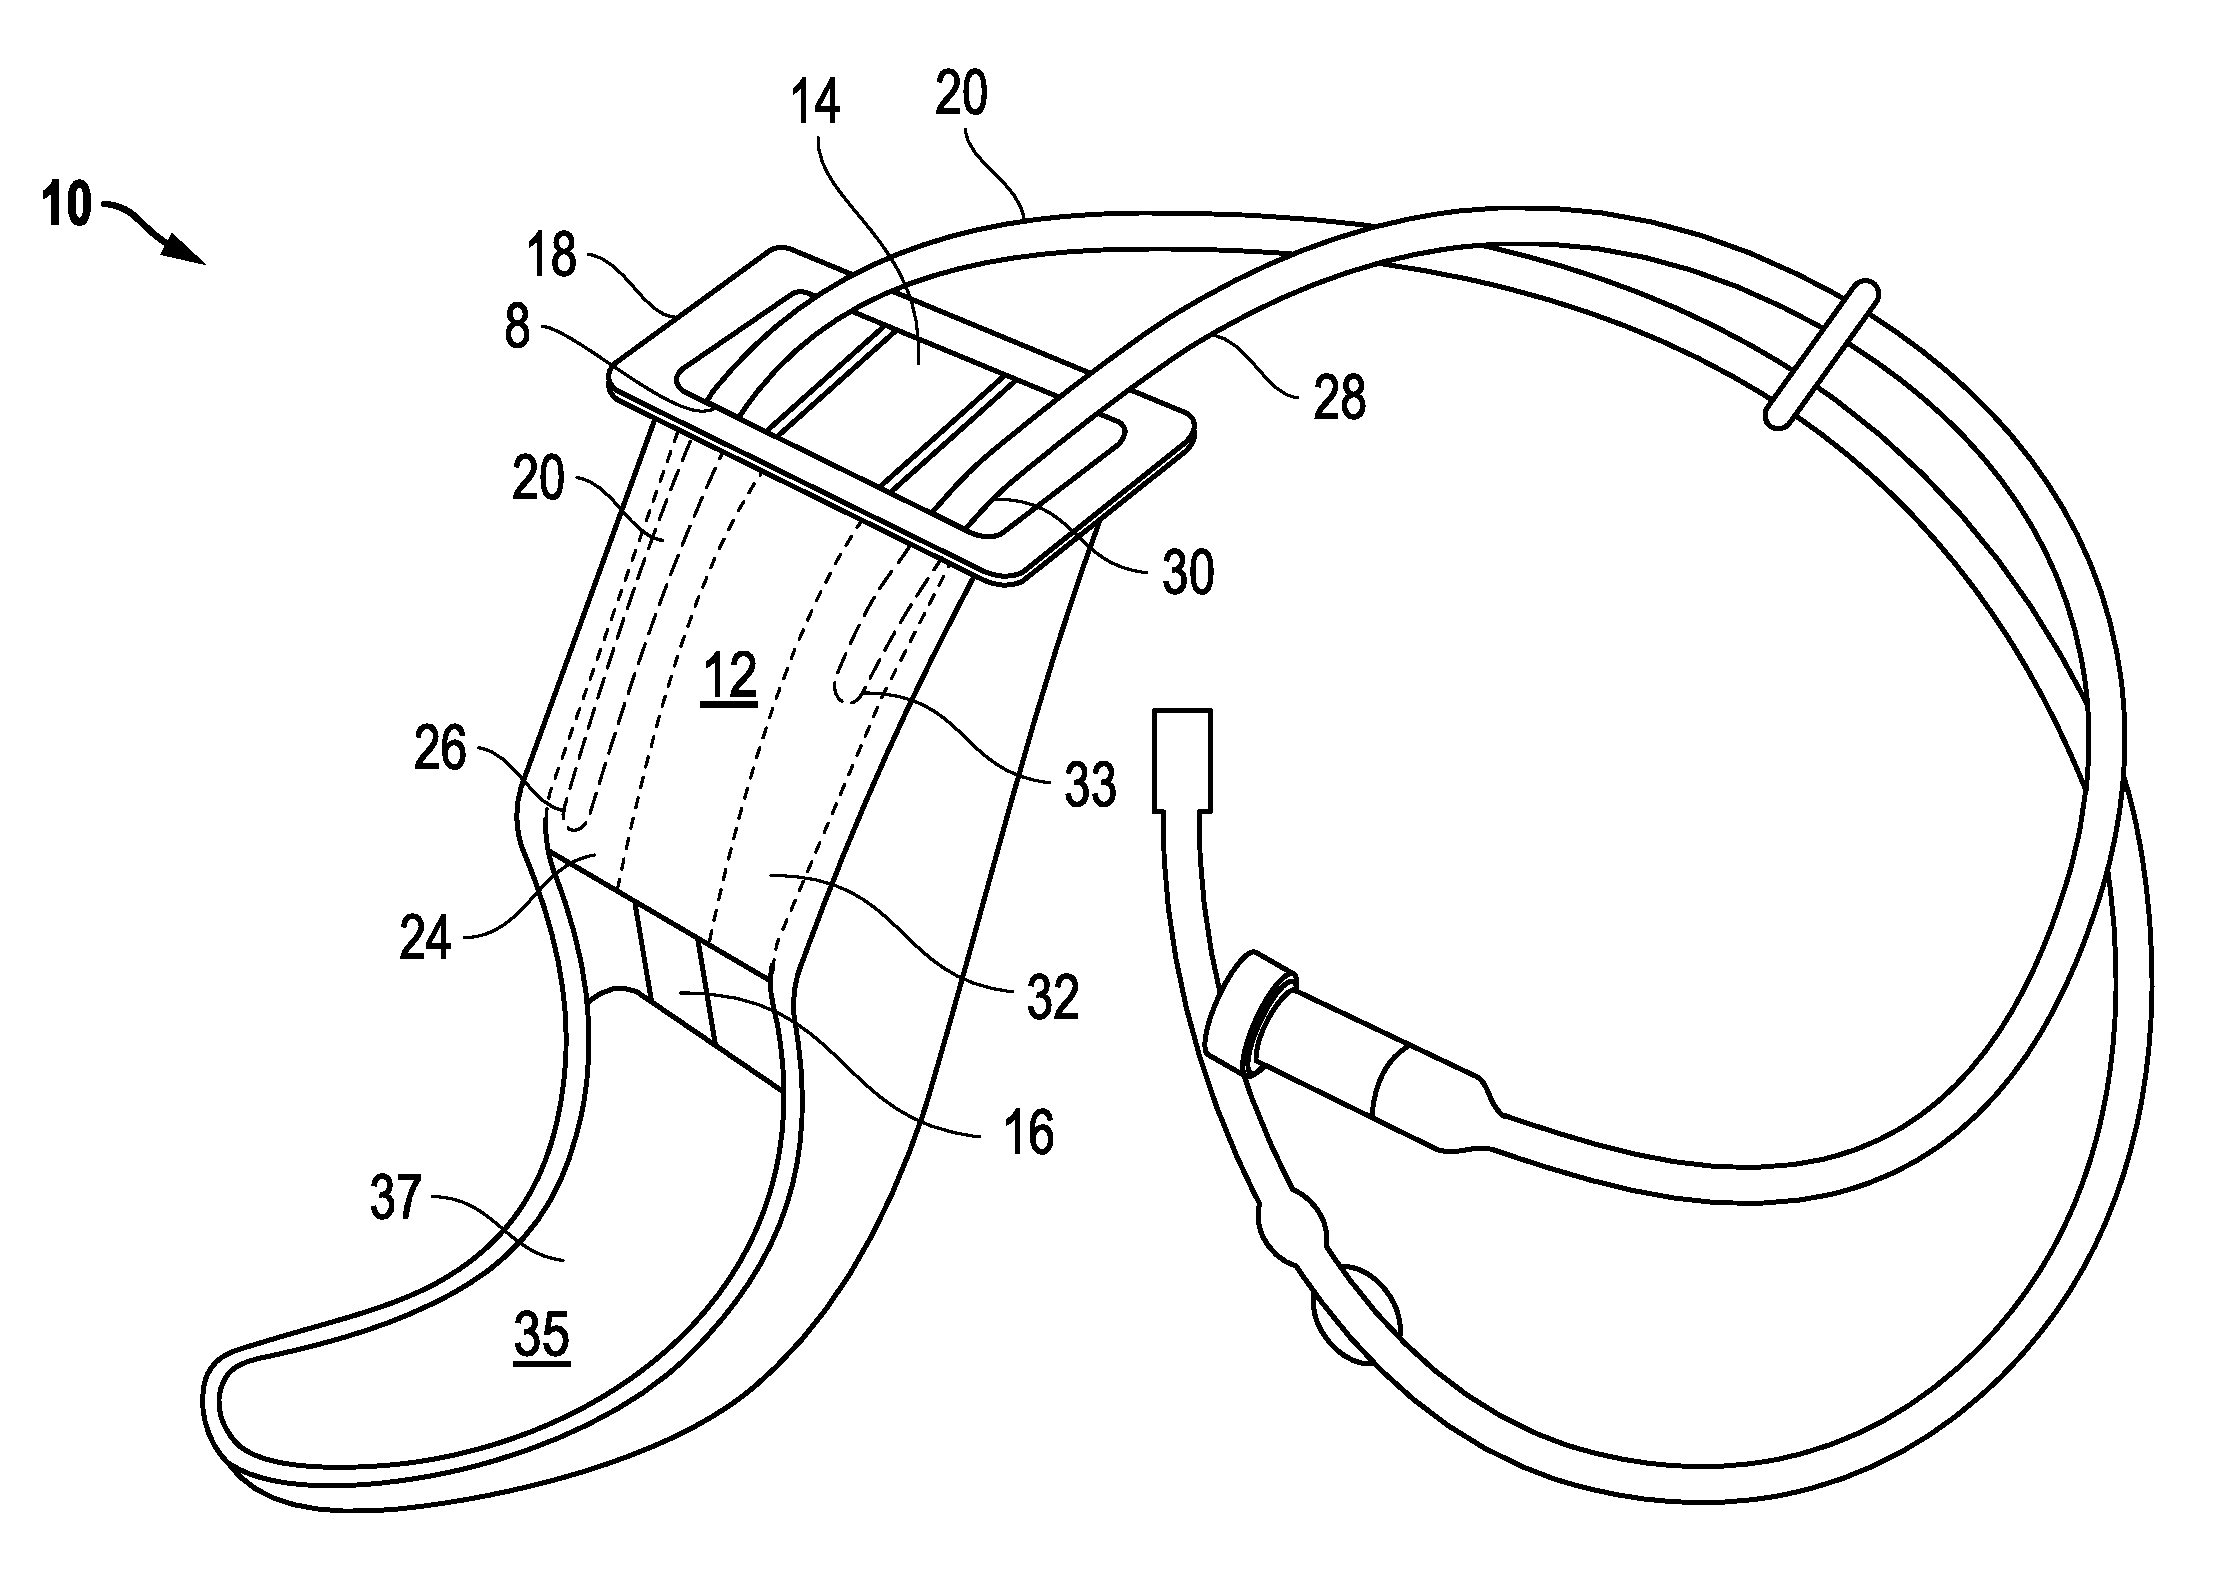 Oral airway for endoscopic and intubating procedures